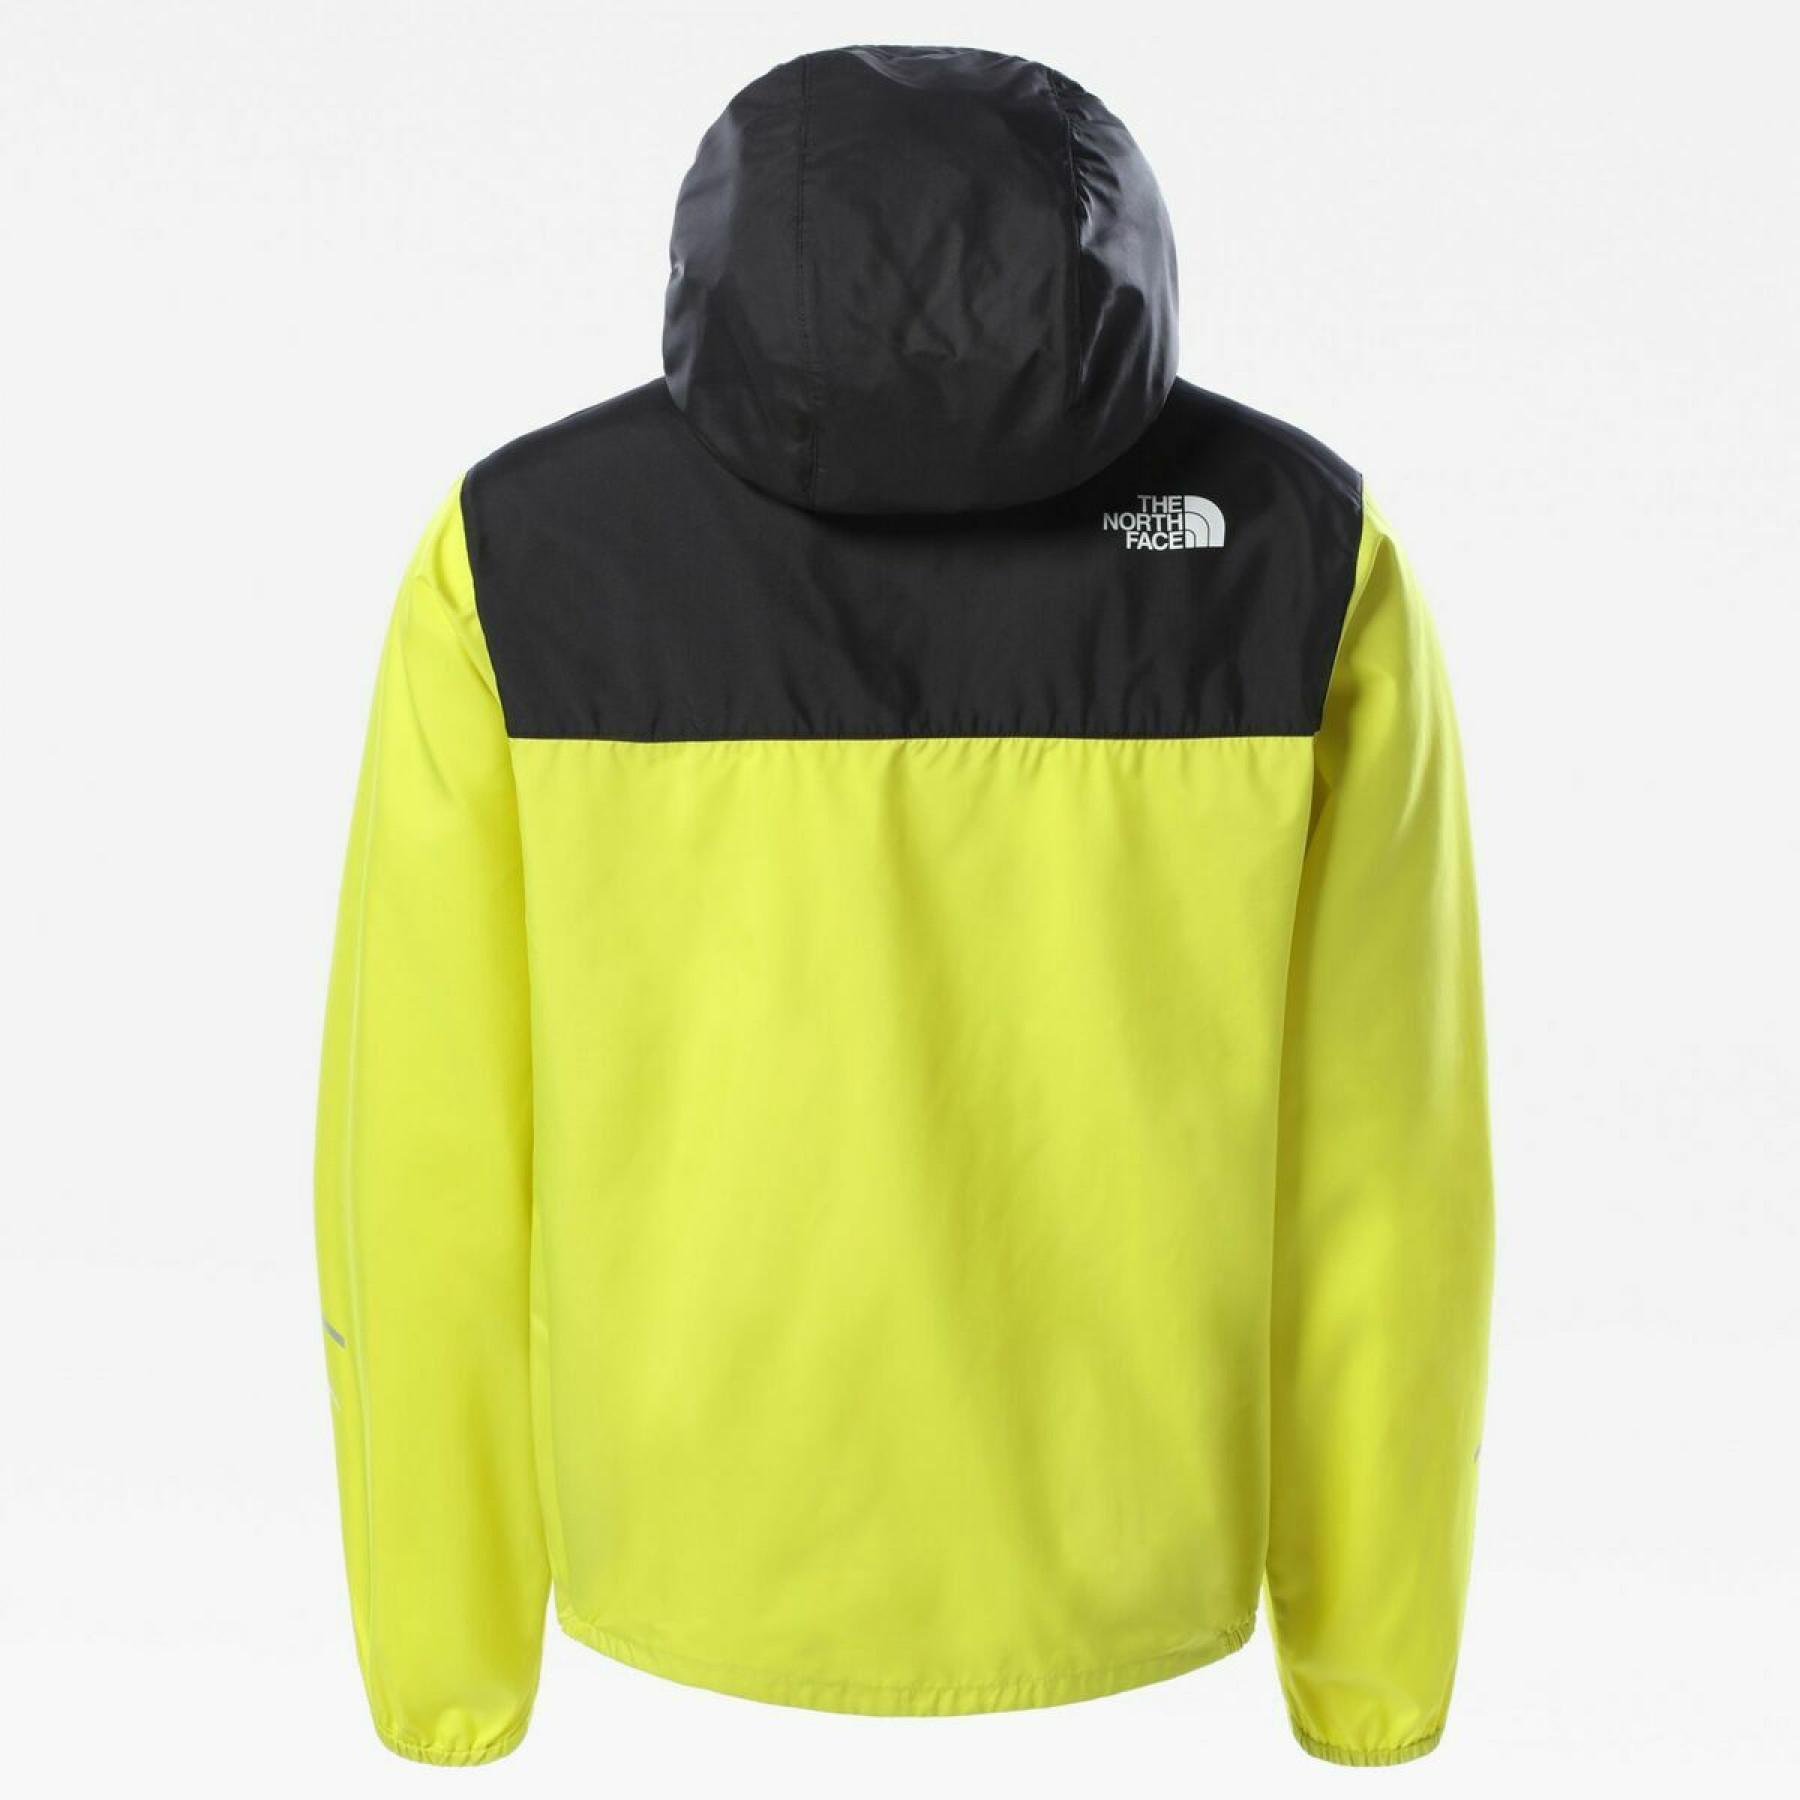 Giacca per bambini The North Face Reactor